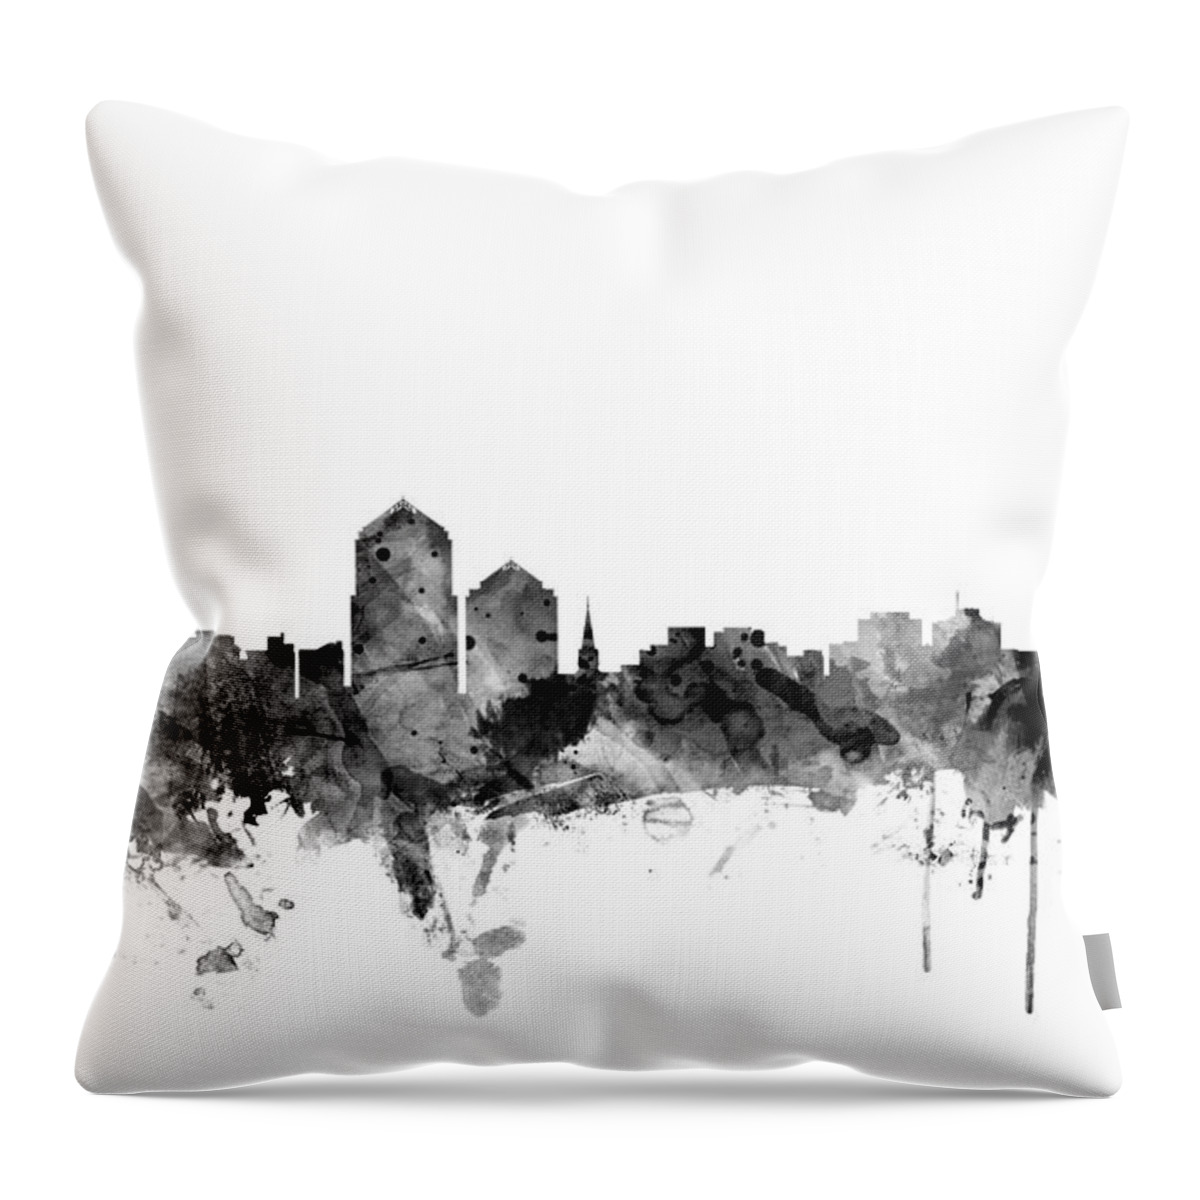 United States Throw Pillow featuring the digital art Albuquerque New Mexico Skyline by Michael Tompsett